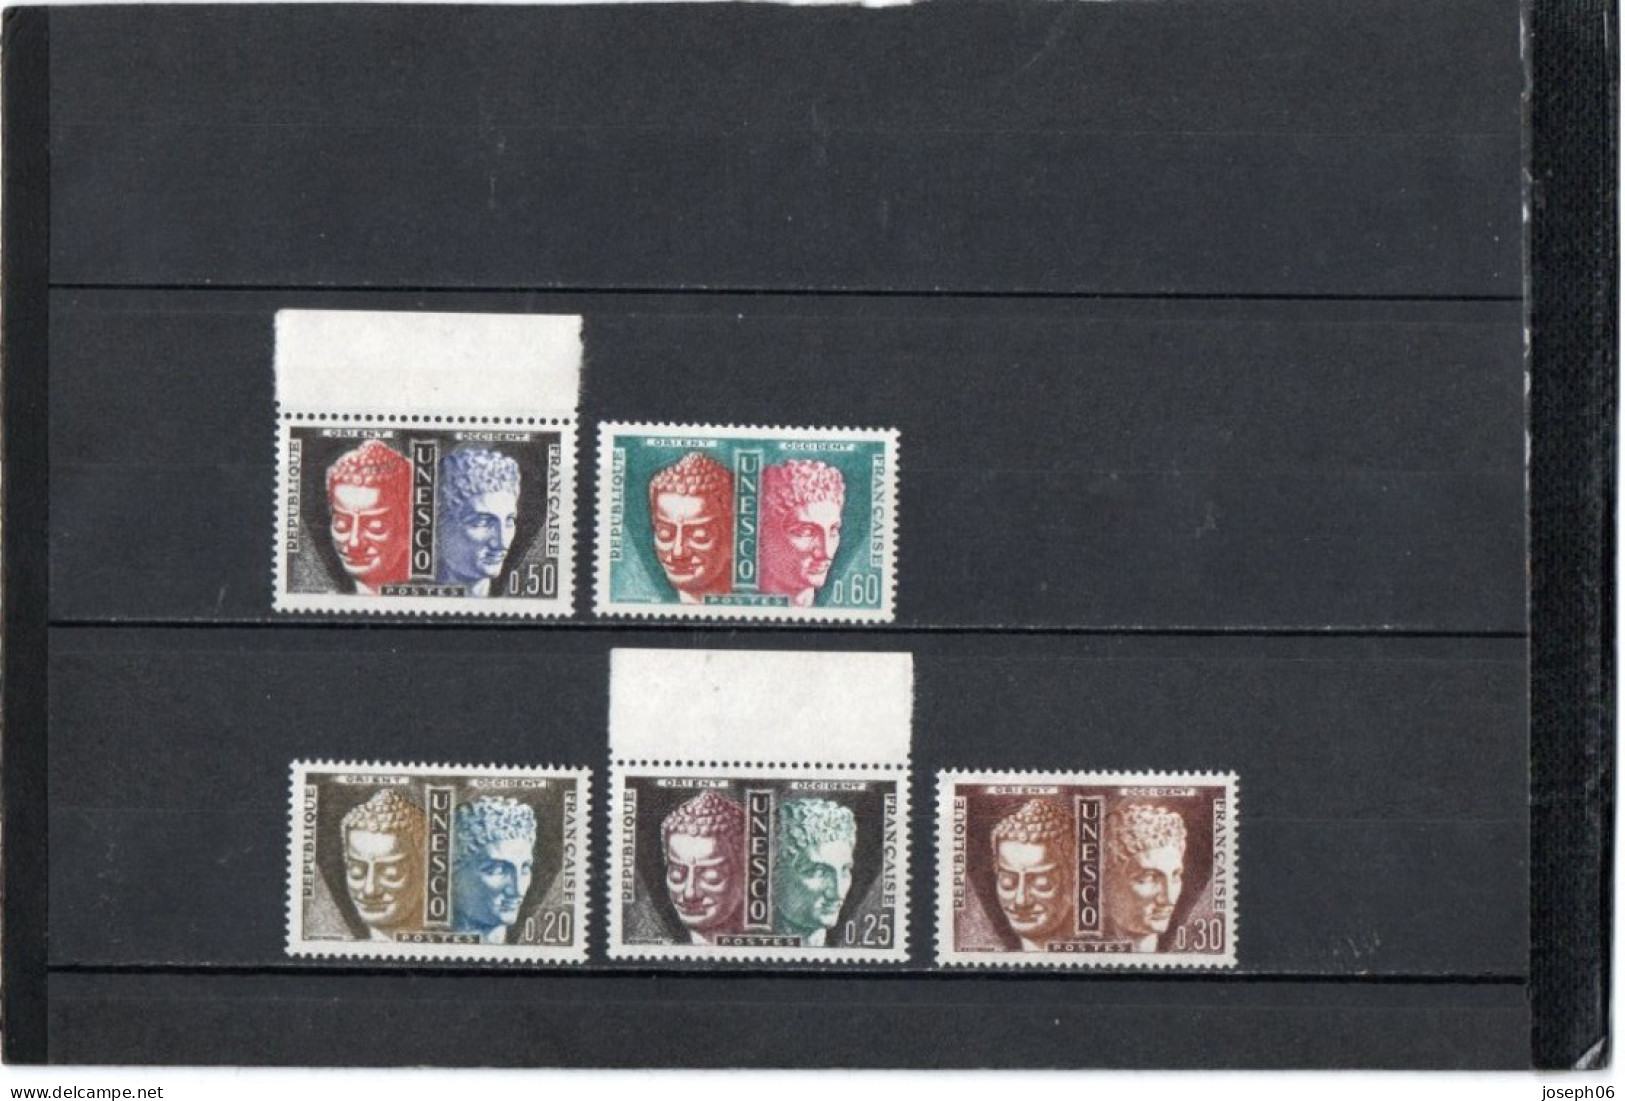 FRANCE    1960-65  Service  Unesco  Y.T. N° 22  à  26  Complet   NEUF** - Mint/Hinged